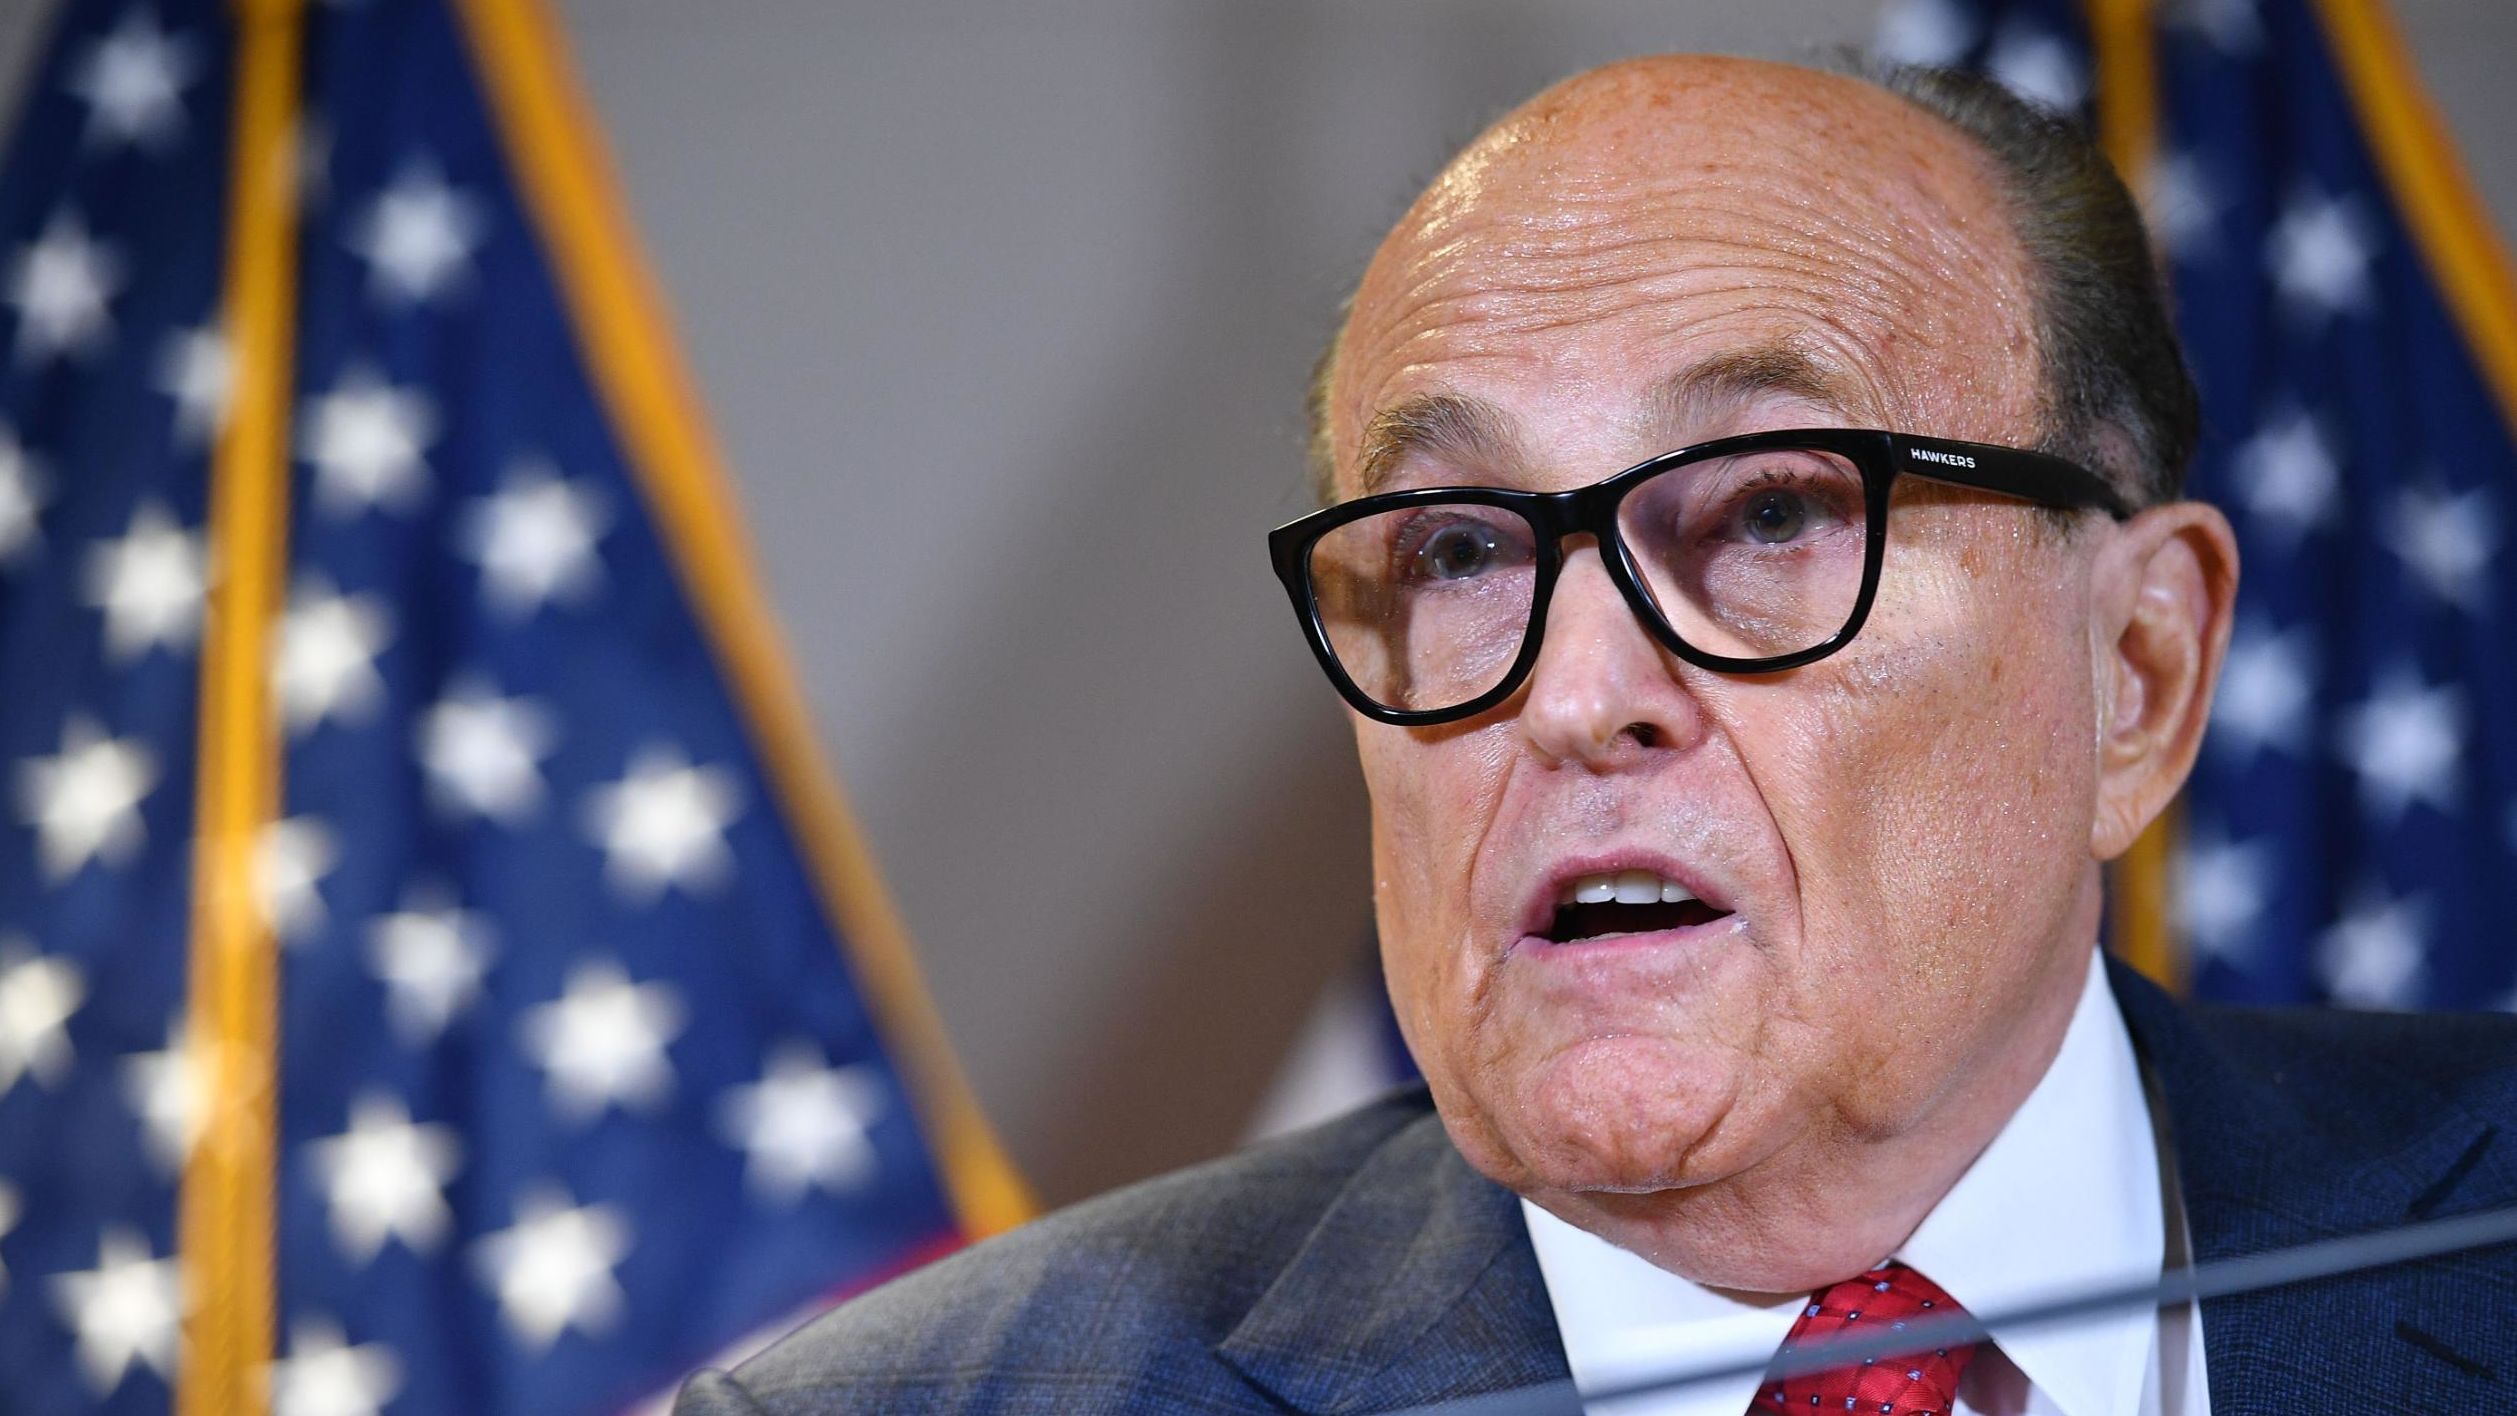 Rudy Giuliani speaks during a press conference at the Republican National Committee headquarters in Washington, DC, on November 19, 2020. 